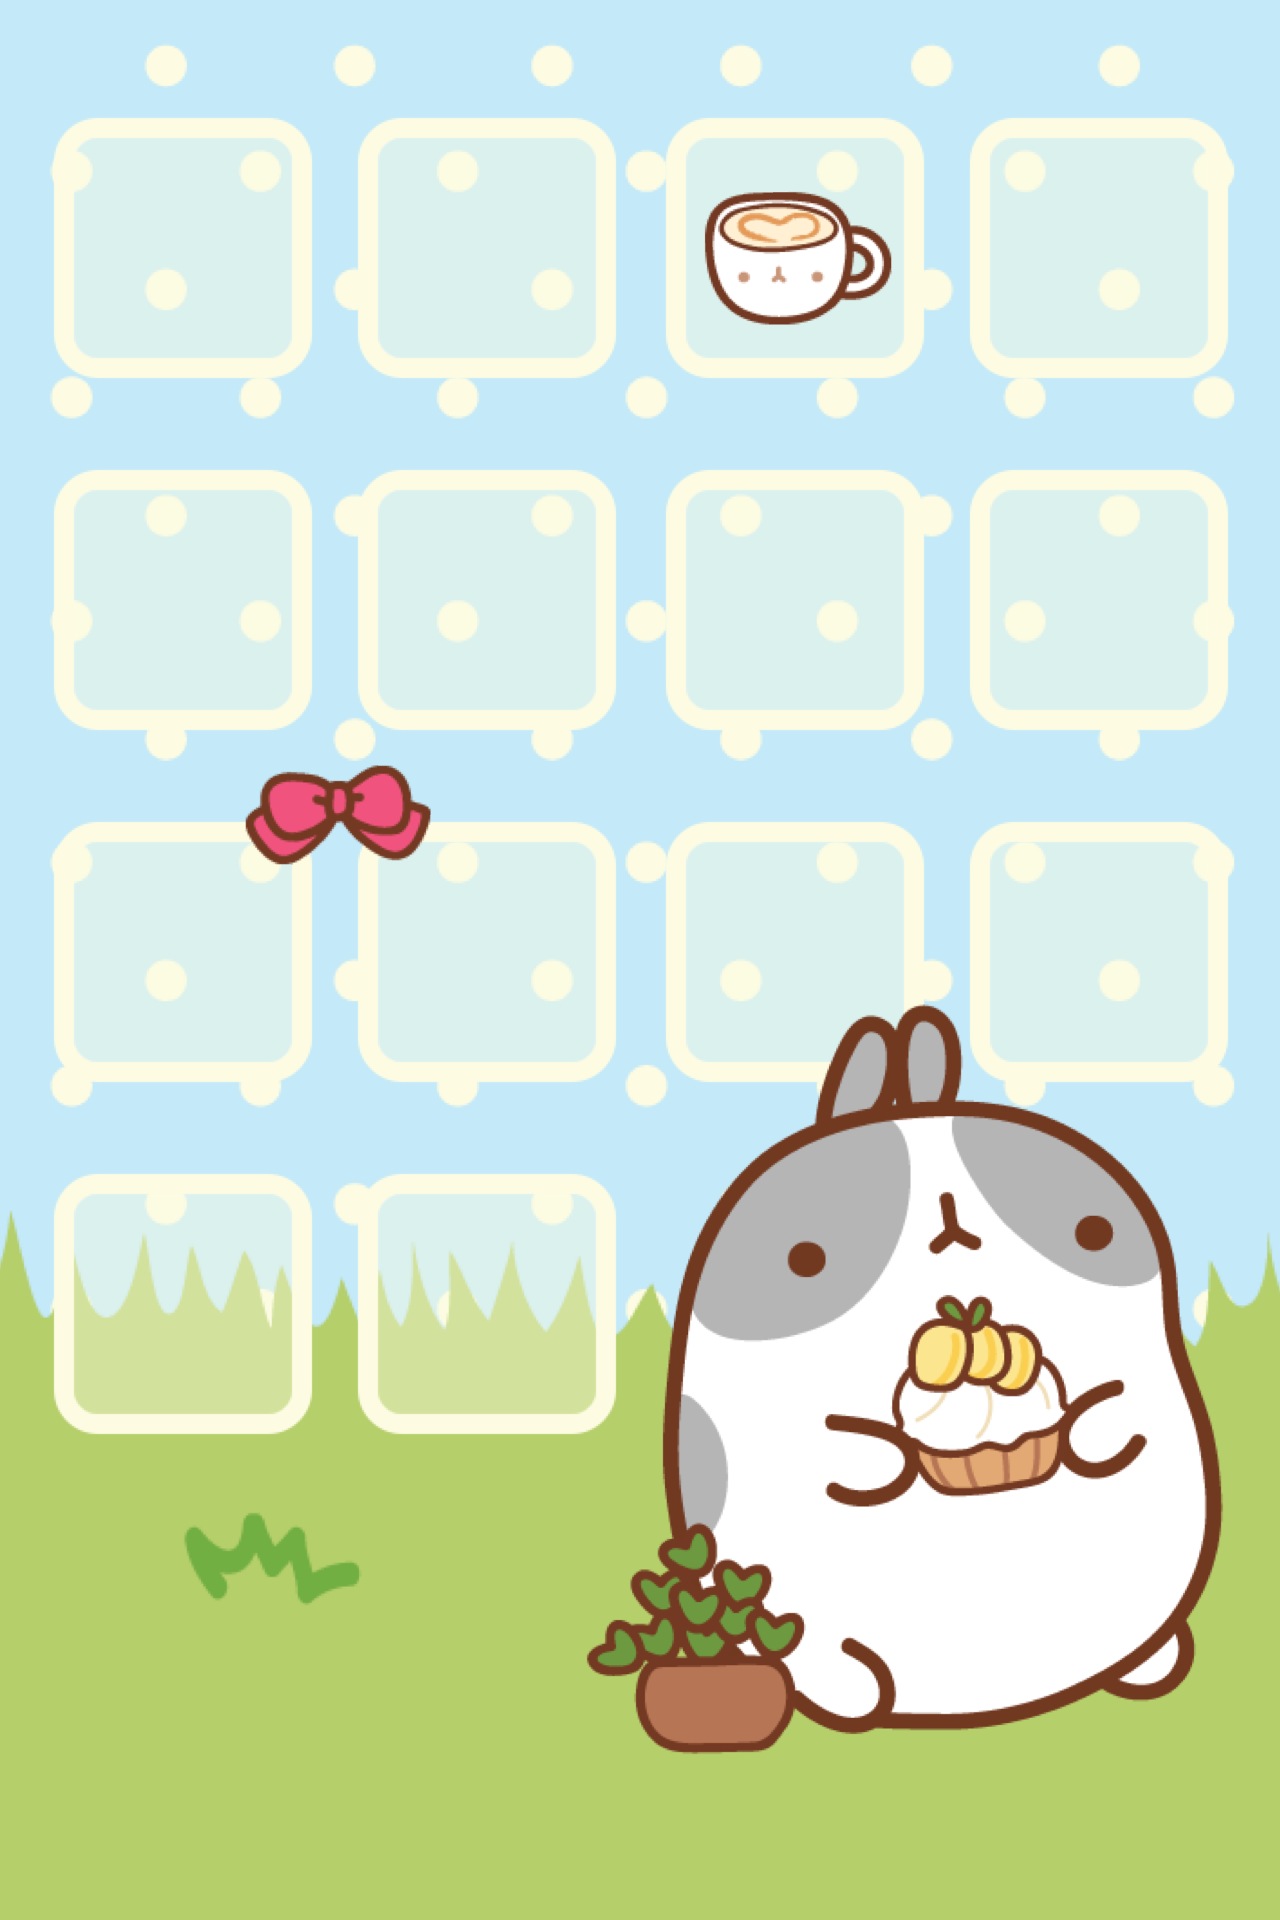 Image uploaded by     Find images and videos about cute   Cute fall wallpaper Pusheen cat  Pusheen christmas